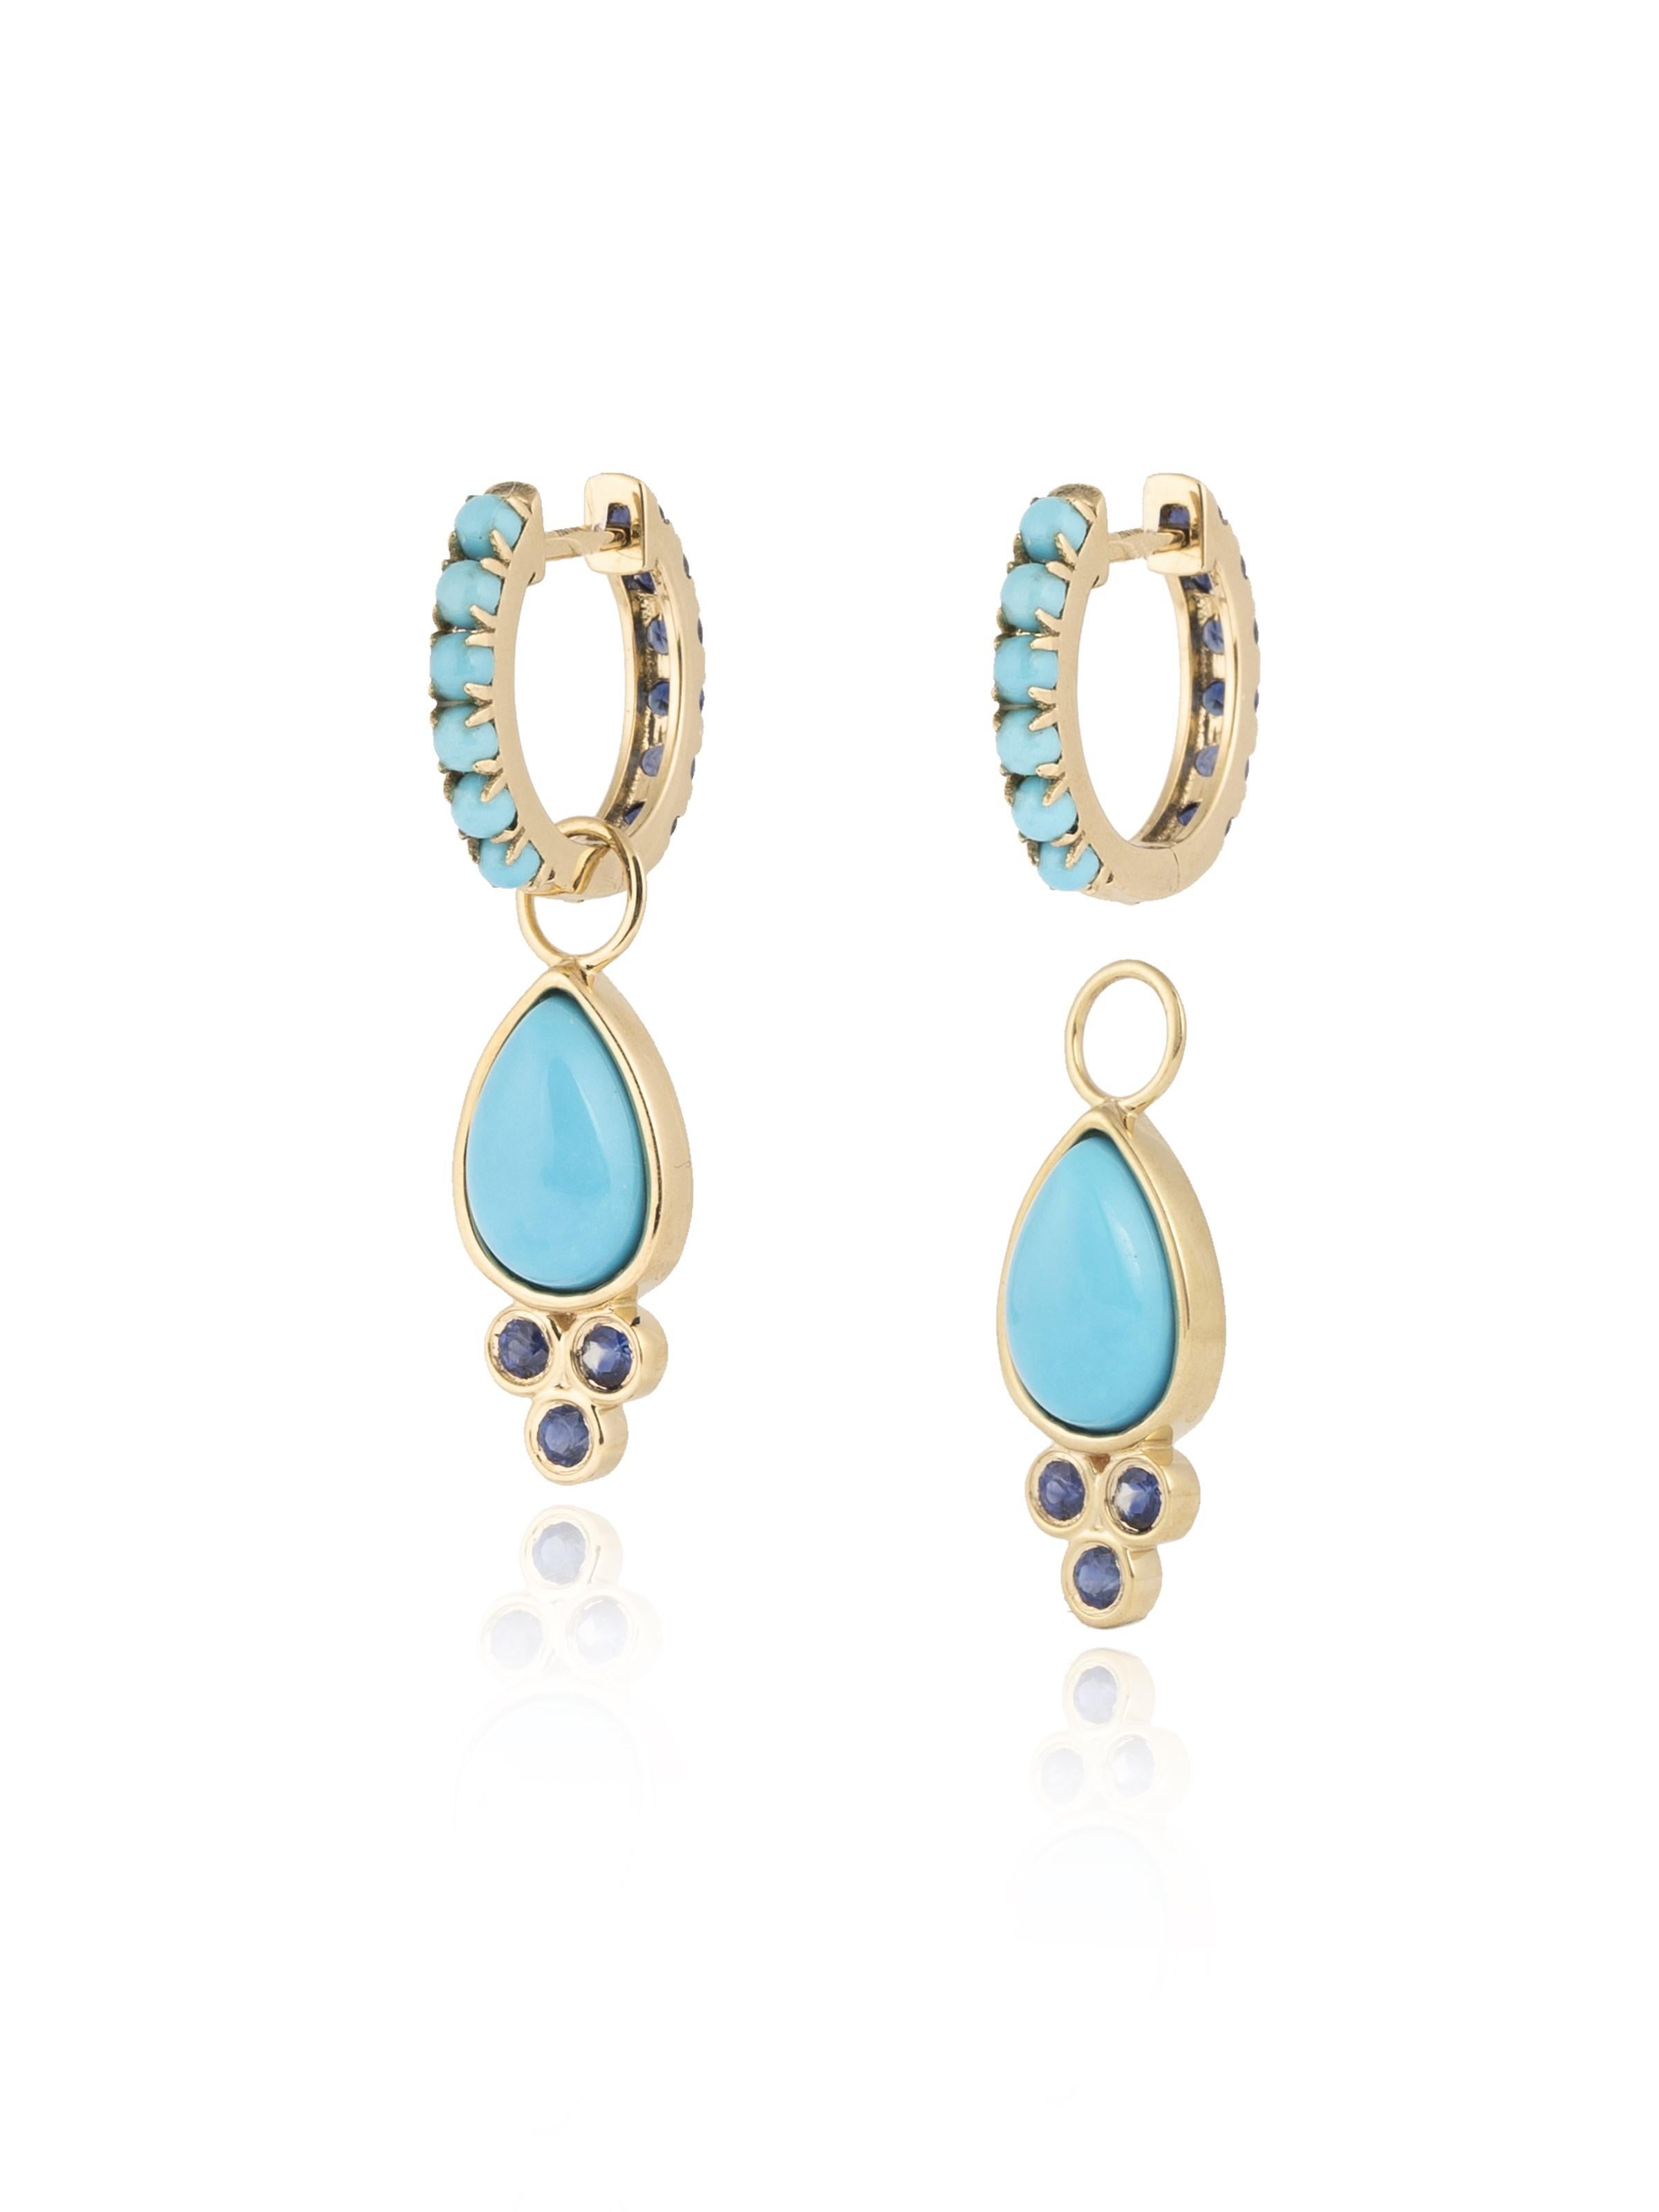 Discover Nina Zhou Sapphire and Turquoise Double-sided Hoop Earrings with Drop Enhancers. These exquisite earrings redefine elegance, featuring a stunning combination of sapphires and turquoise on both sides for a versatile look that's both playful